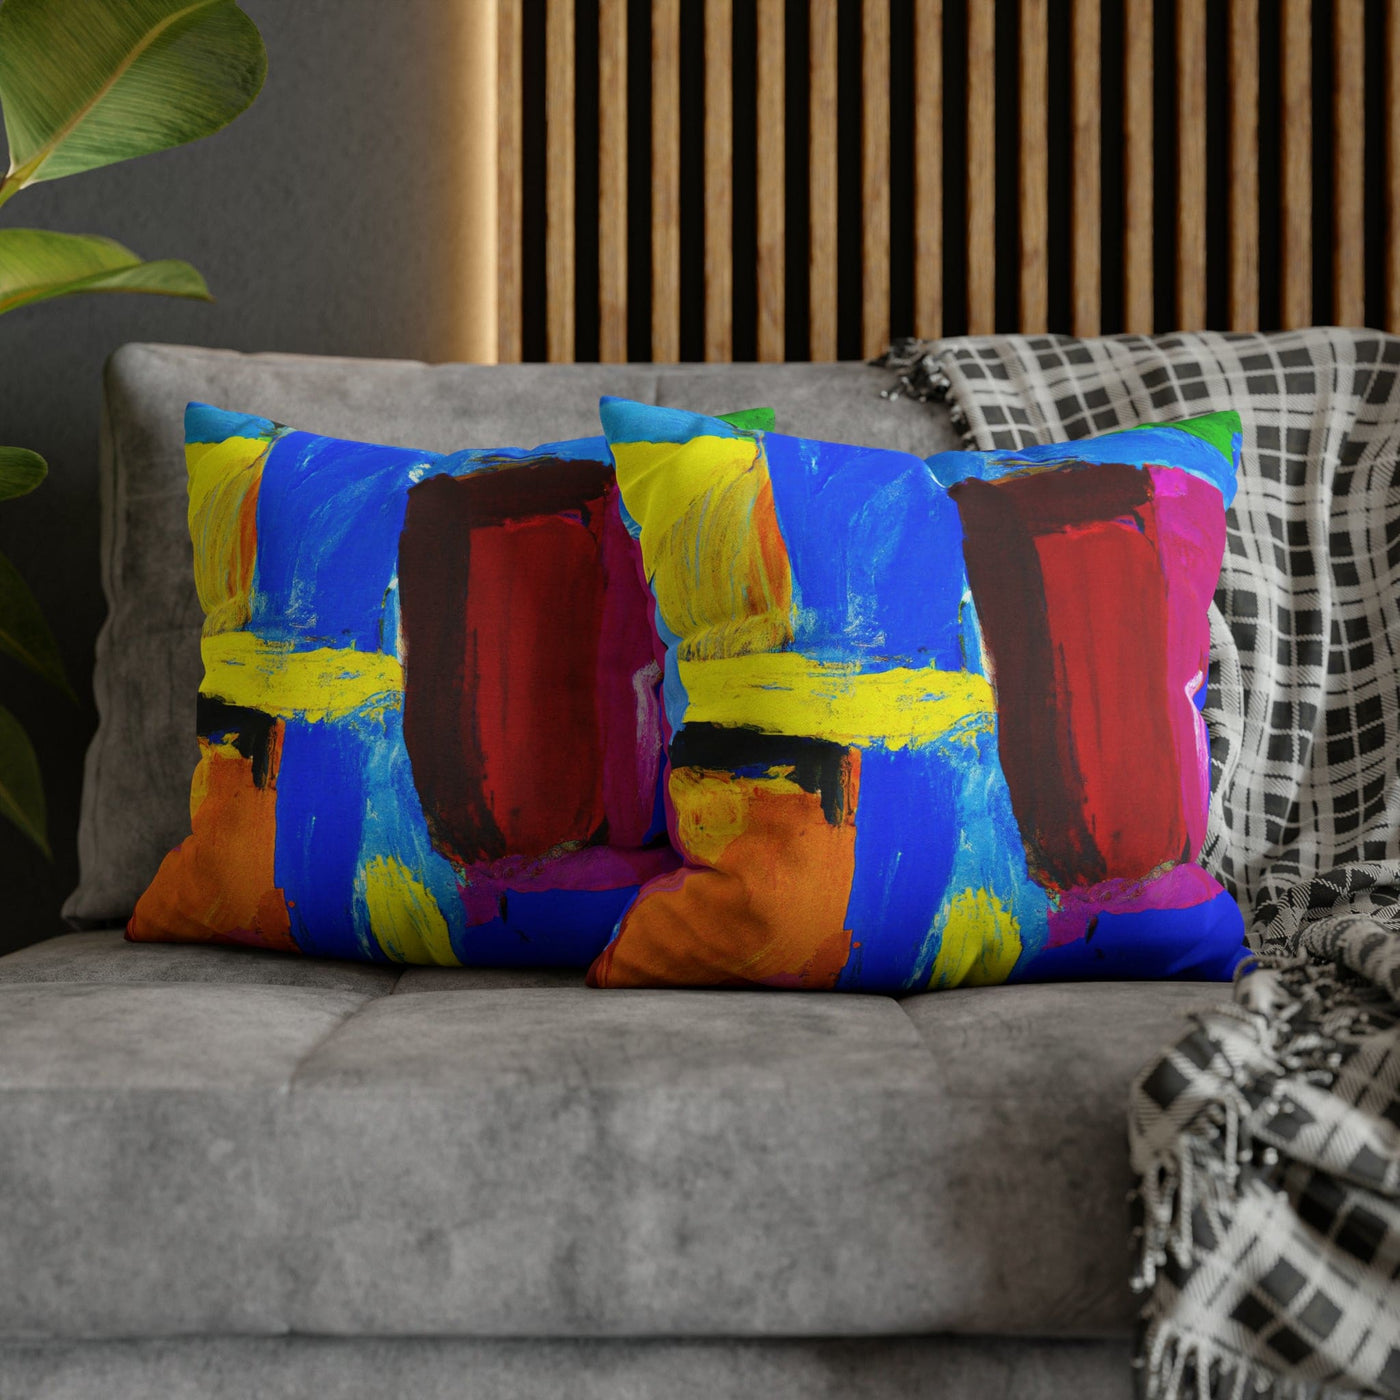 Decorative Throw Pillow Covers With Zipper - Set Of 2 Blue Red Yellow